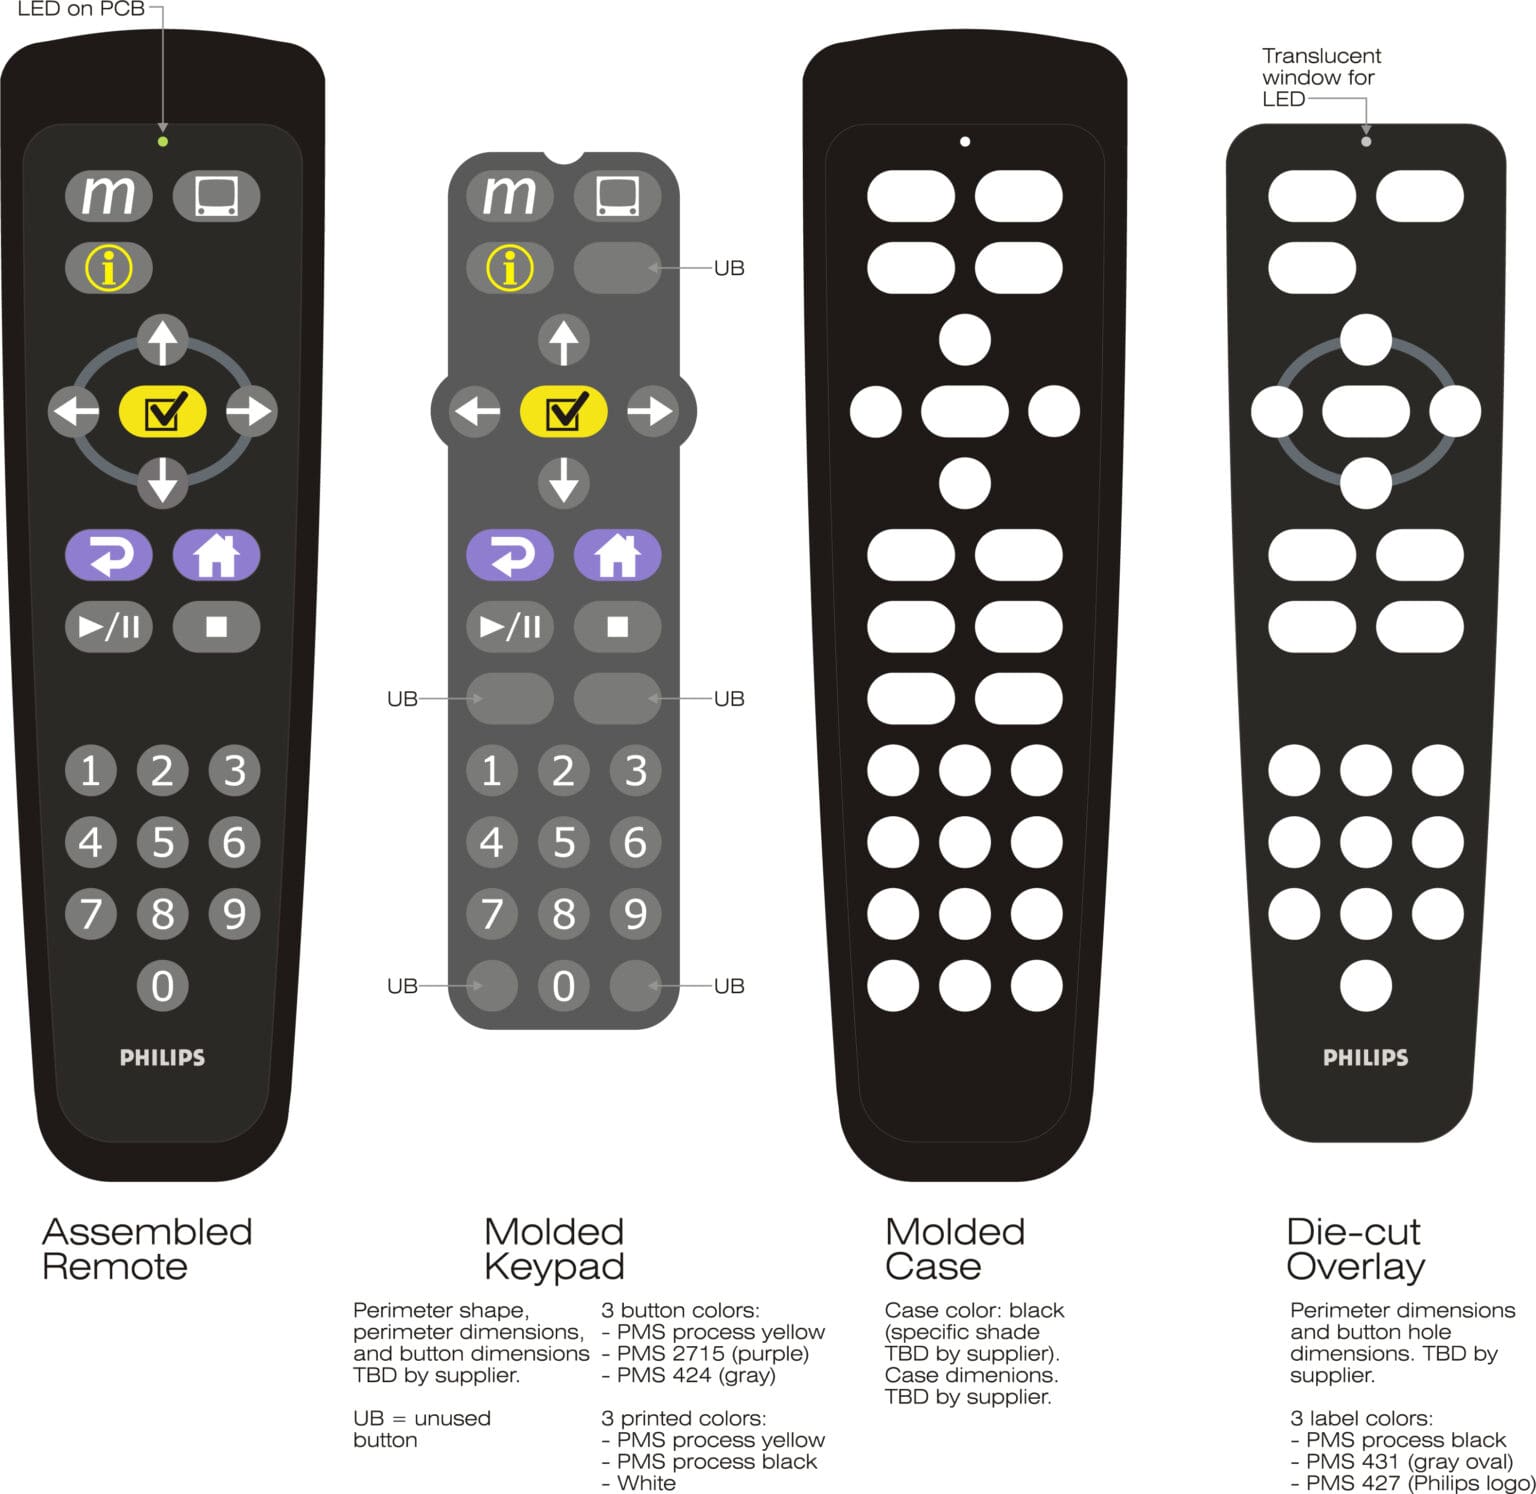 Detail image of a custom remote control with keypad, overlay and molded enclosure